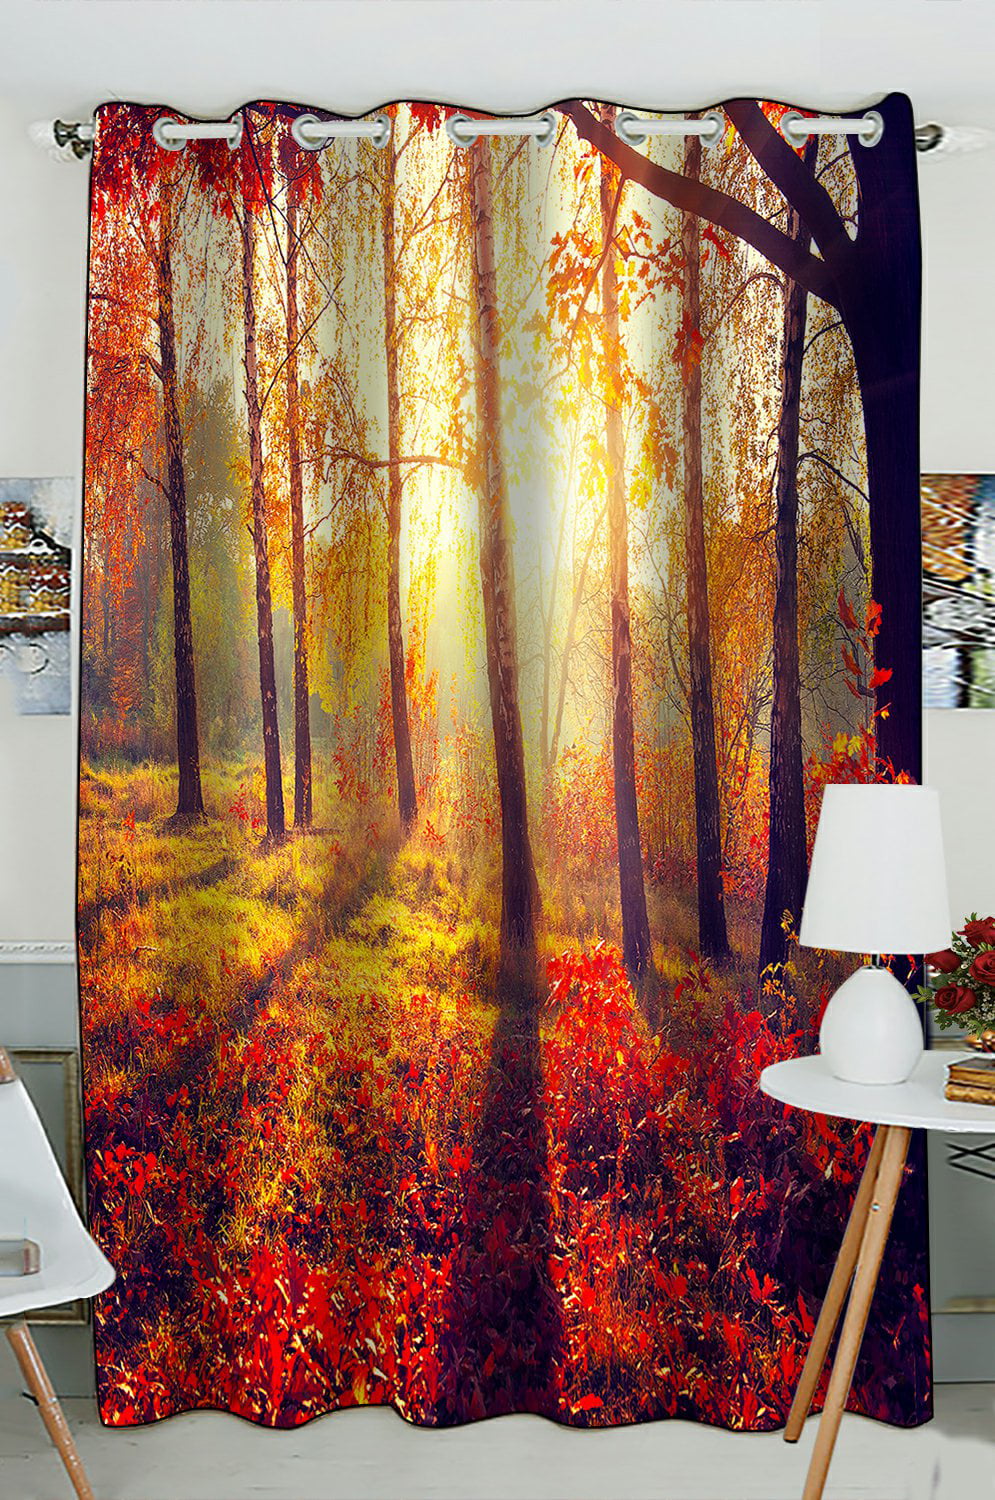 3D Window Curtains Foggy Forest Maple Leaves Fall Scenery Blockout Drapes Fabric 